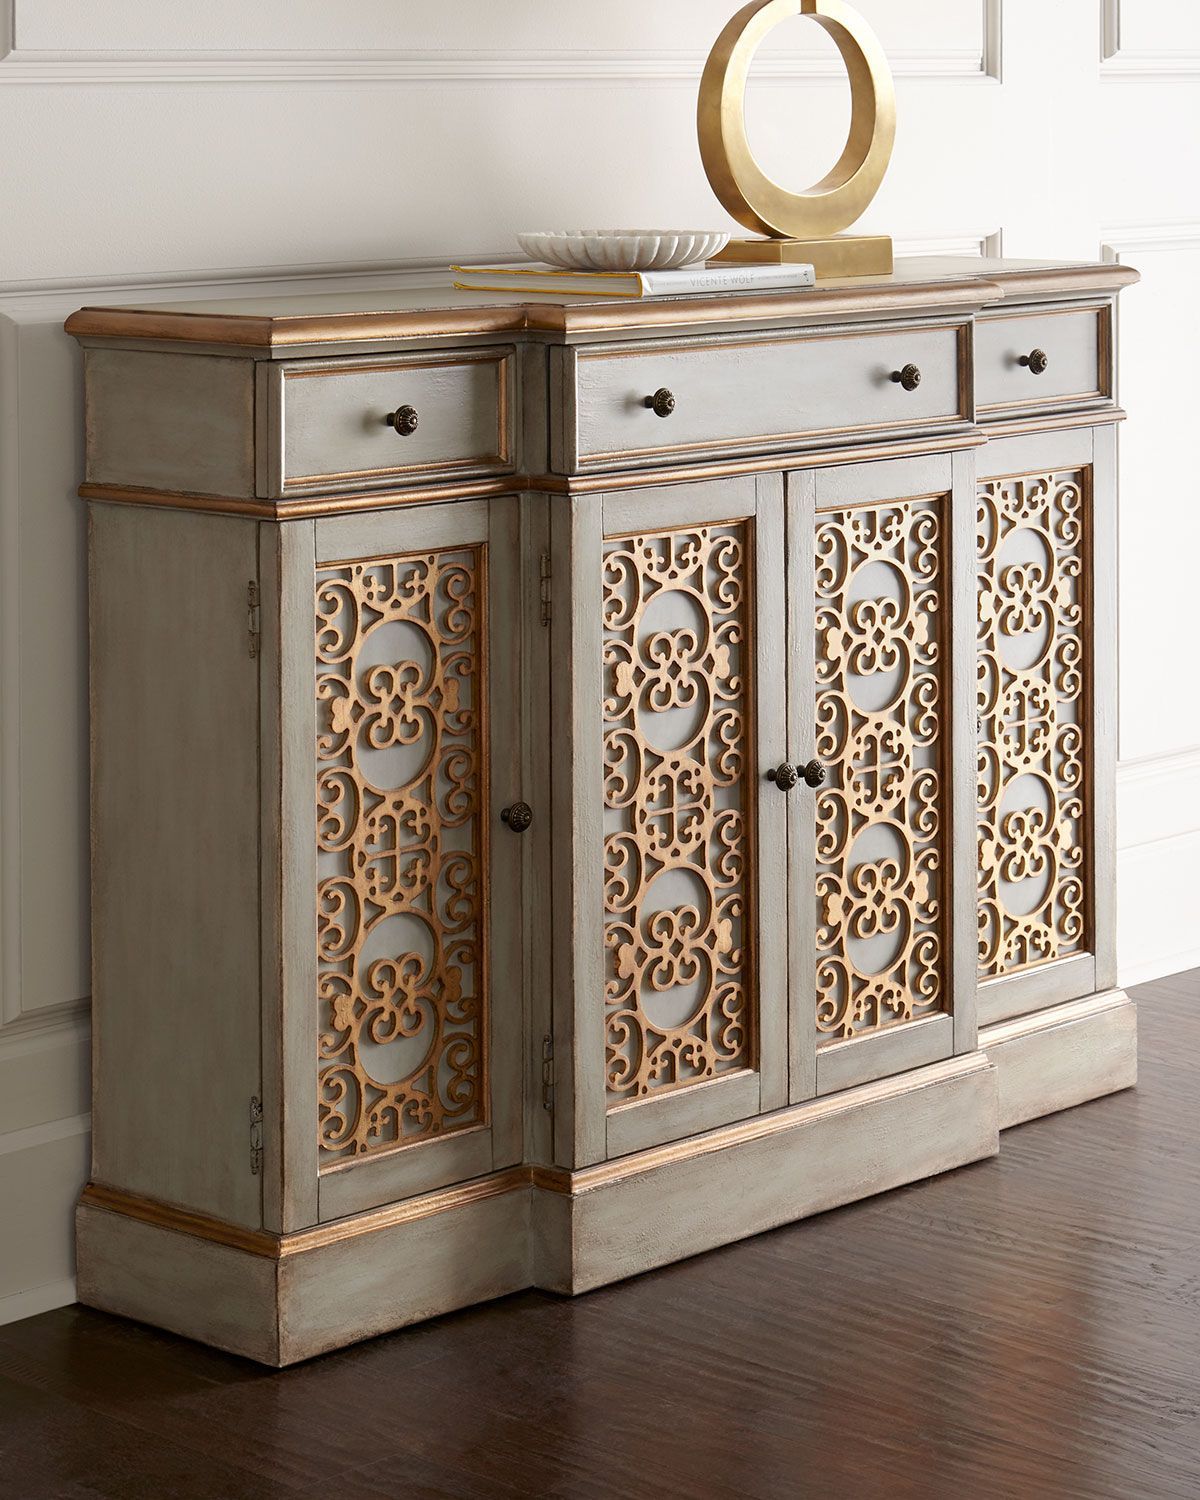 Sideboard Features Intricate Doors Adorned With Scrolled With Regard To Most Up To Date Stillwater Sideboards (View 6 of 20)